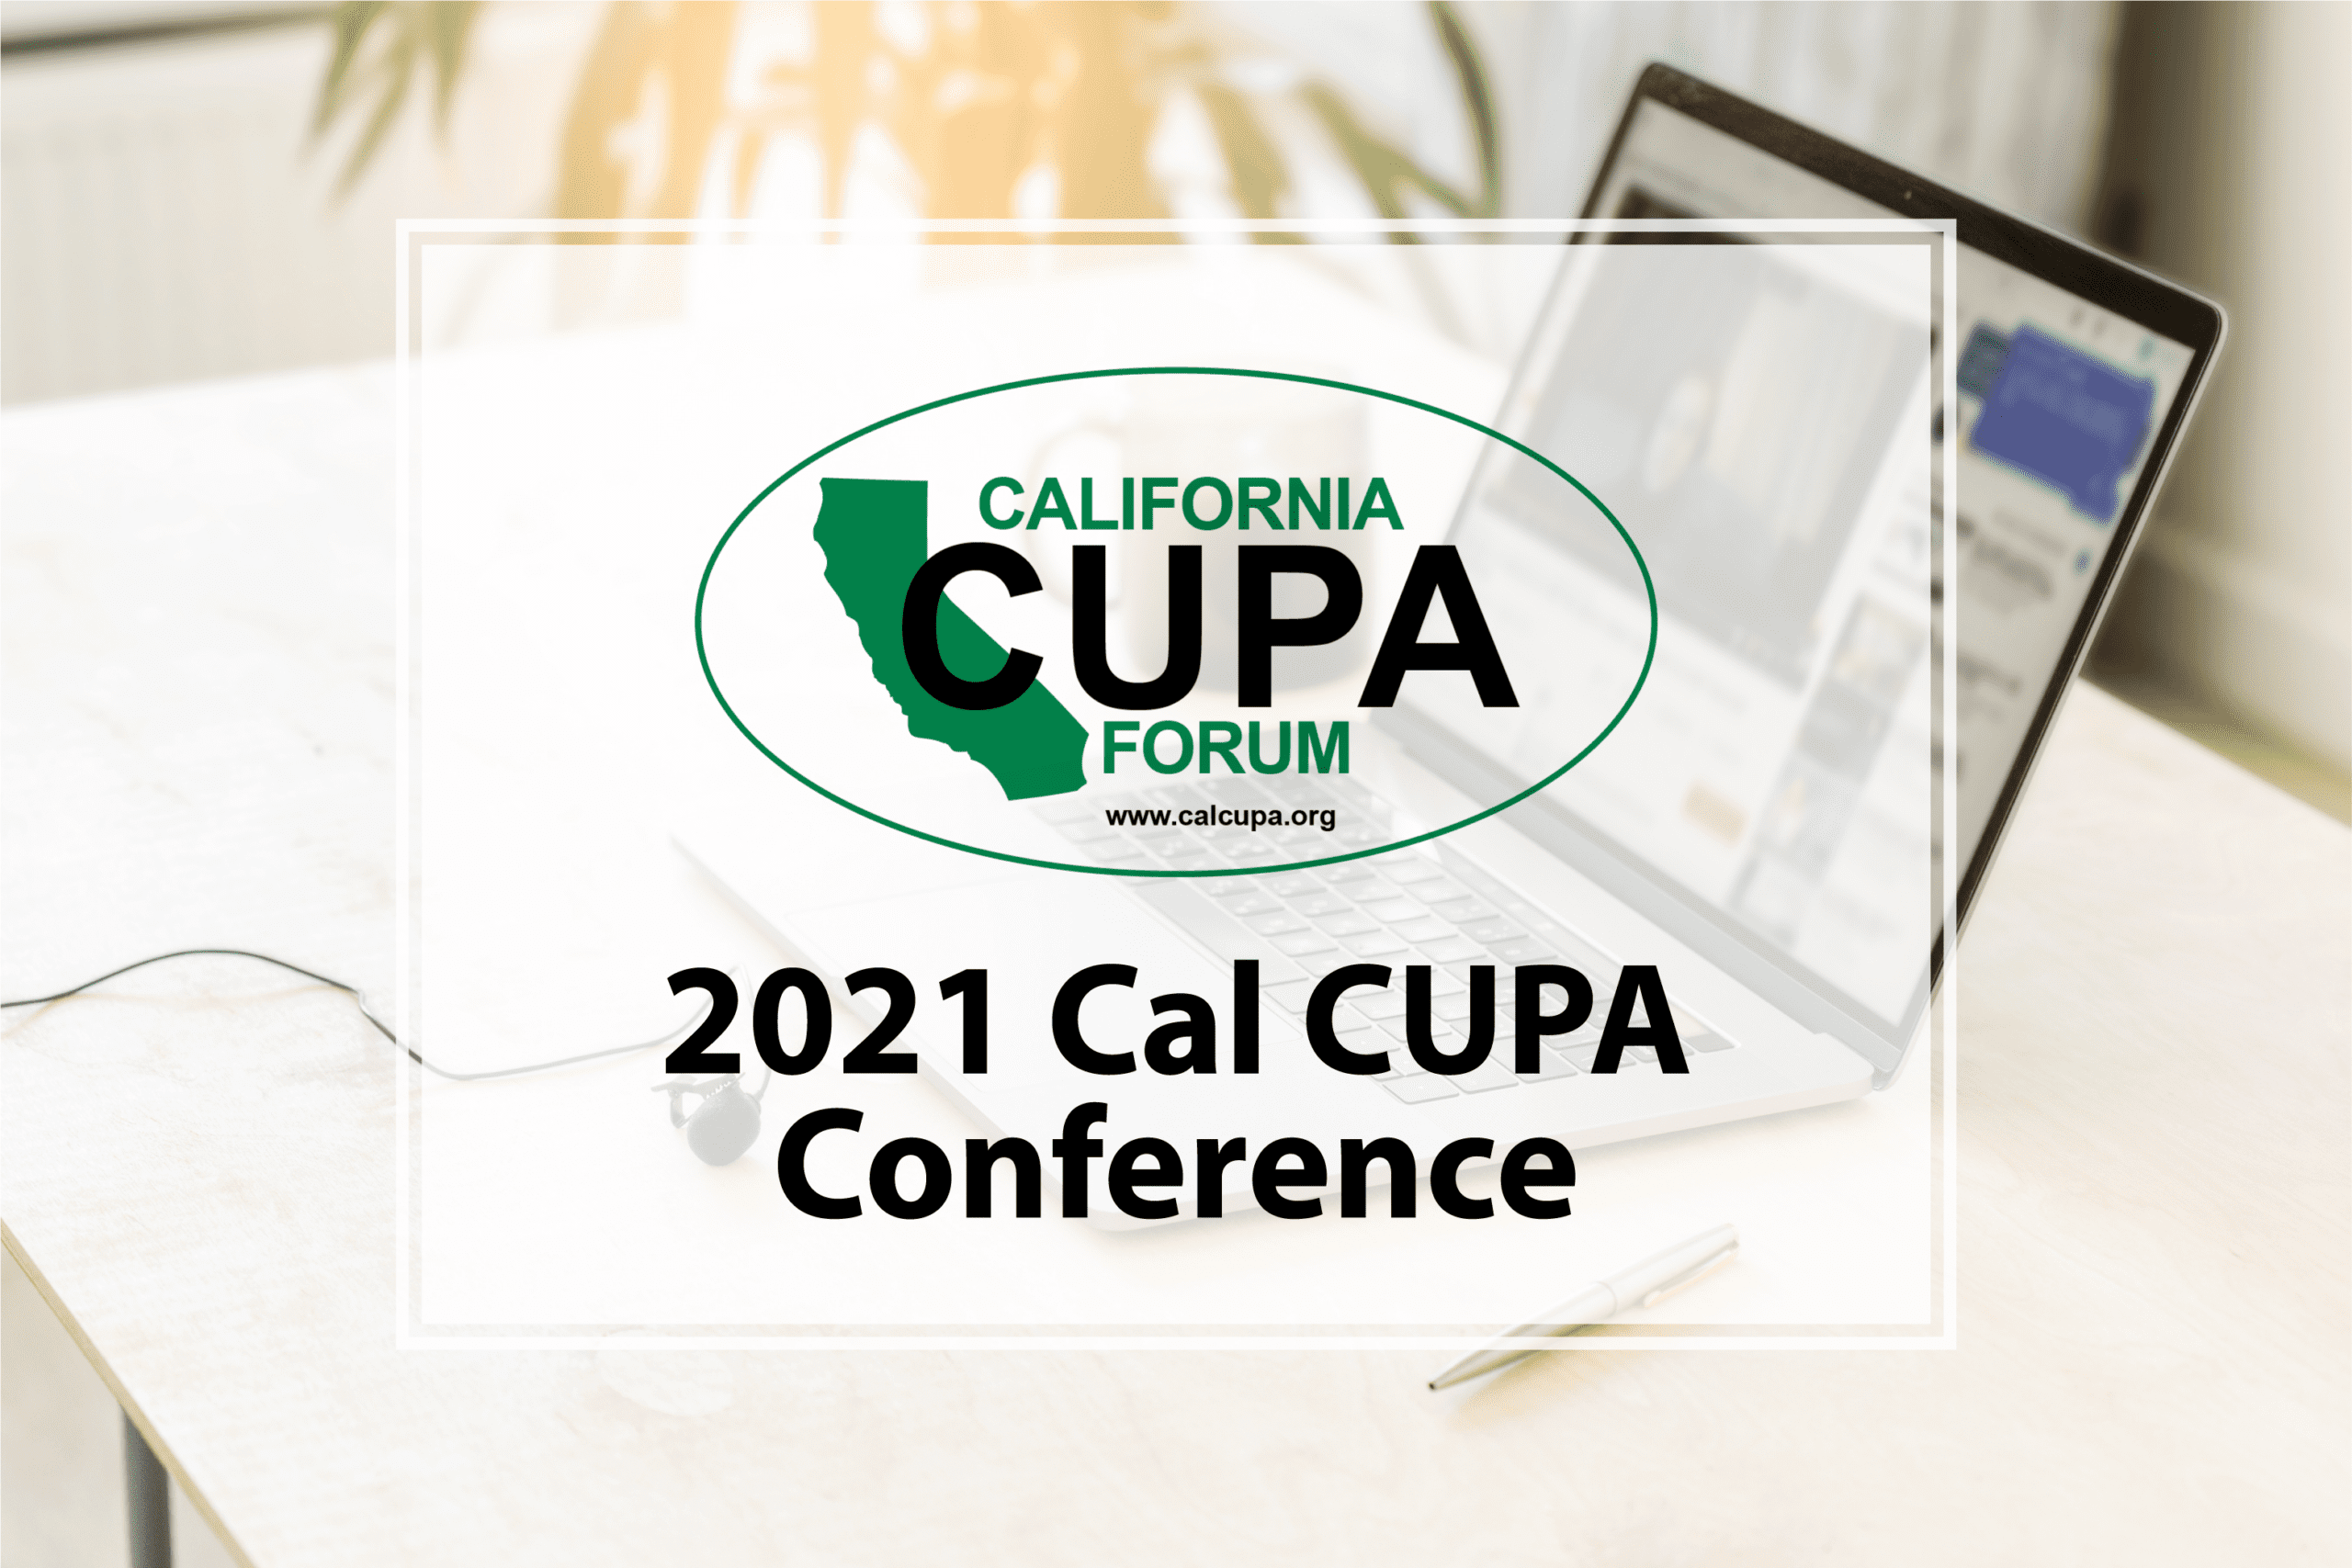 NES Presenting Virtually at 2021 Cal CUPA Conference